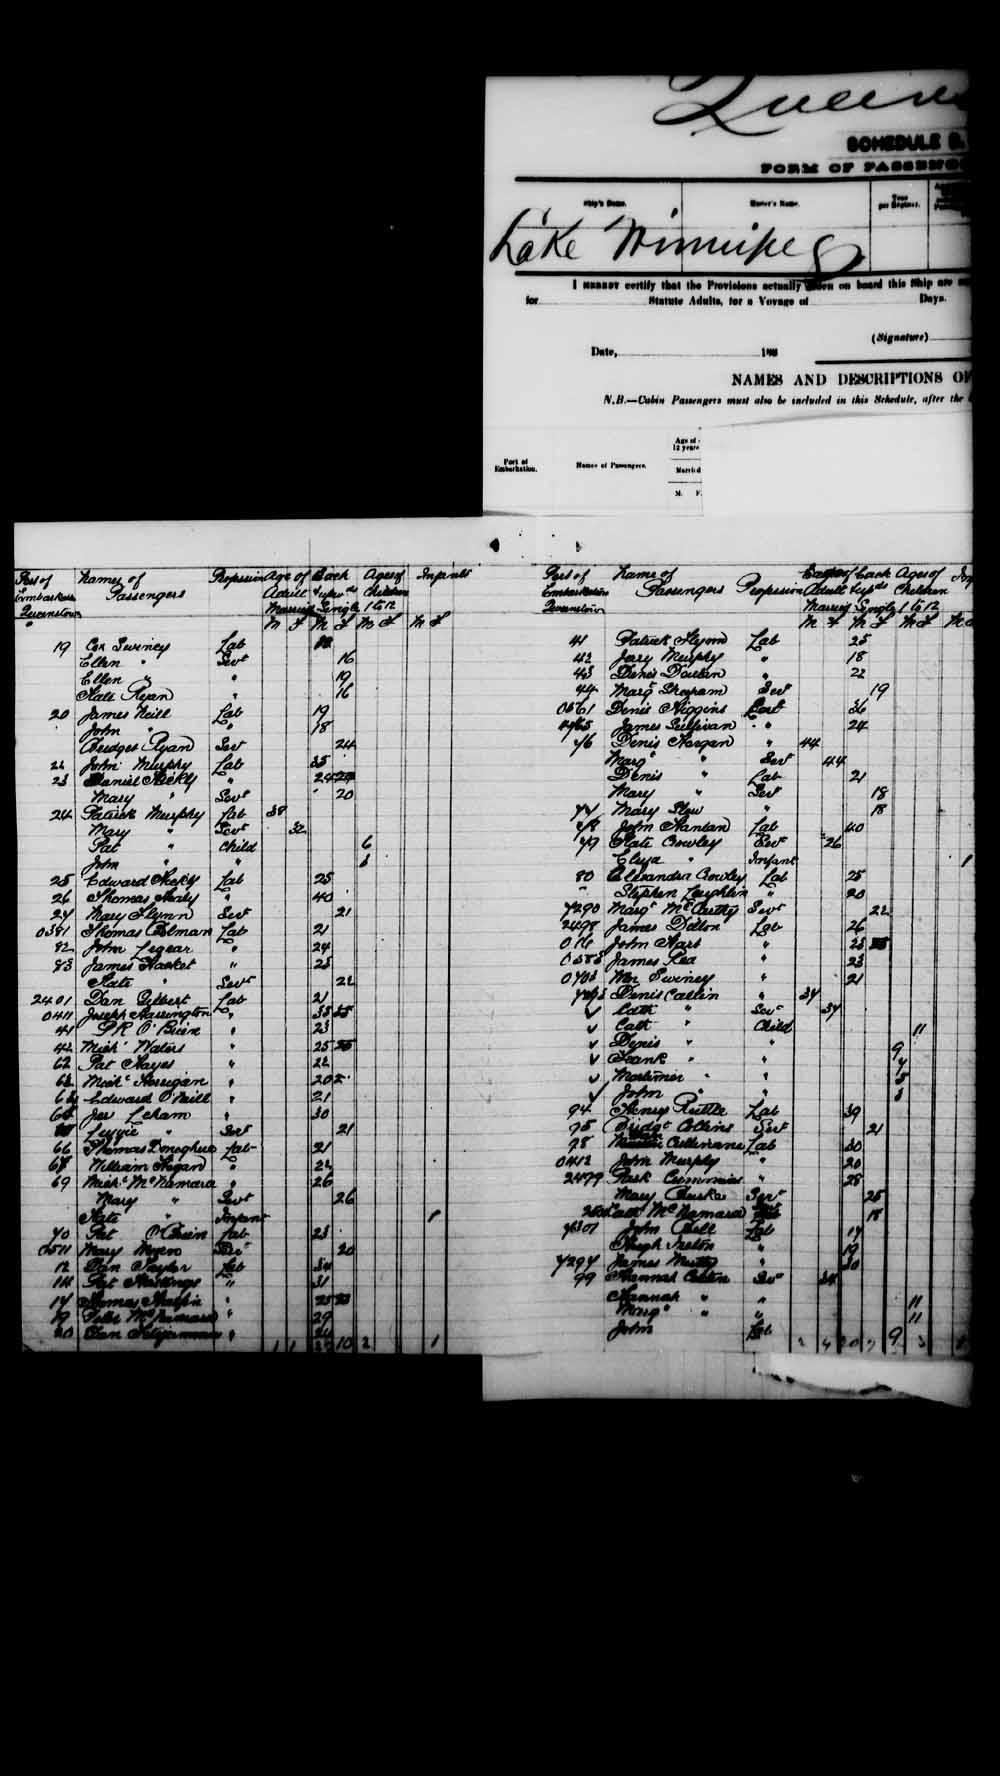 Digitized page of Passenger Lists for Image No.: e003541628